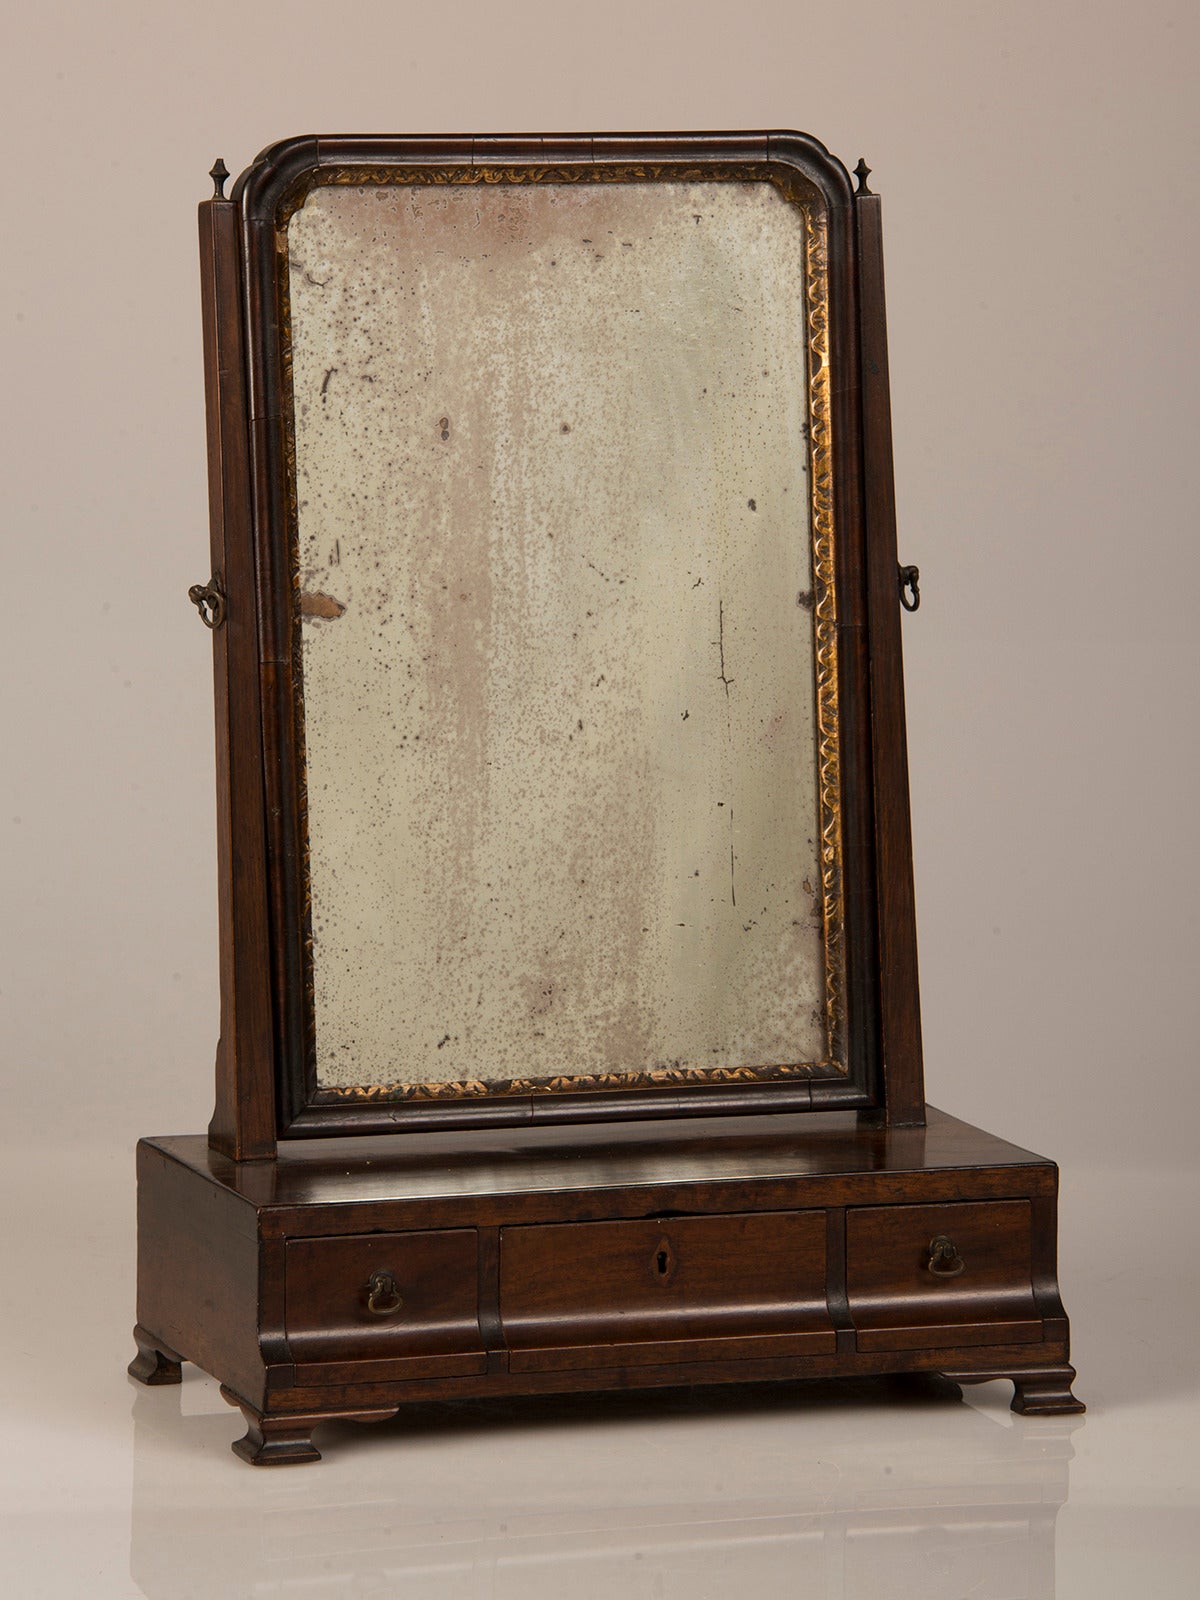 Receive our new selections direct from 1stdibs by email each week. Please click “Follow Dealer” button below and see them first!

An antique English George III period mahogany dressing mirror circa 1790 having a shaped front with three drawers for